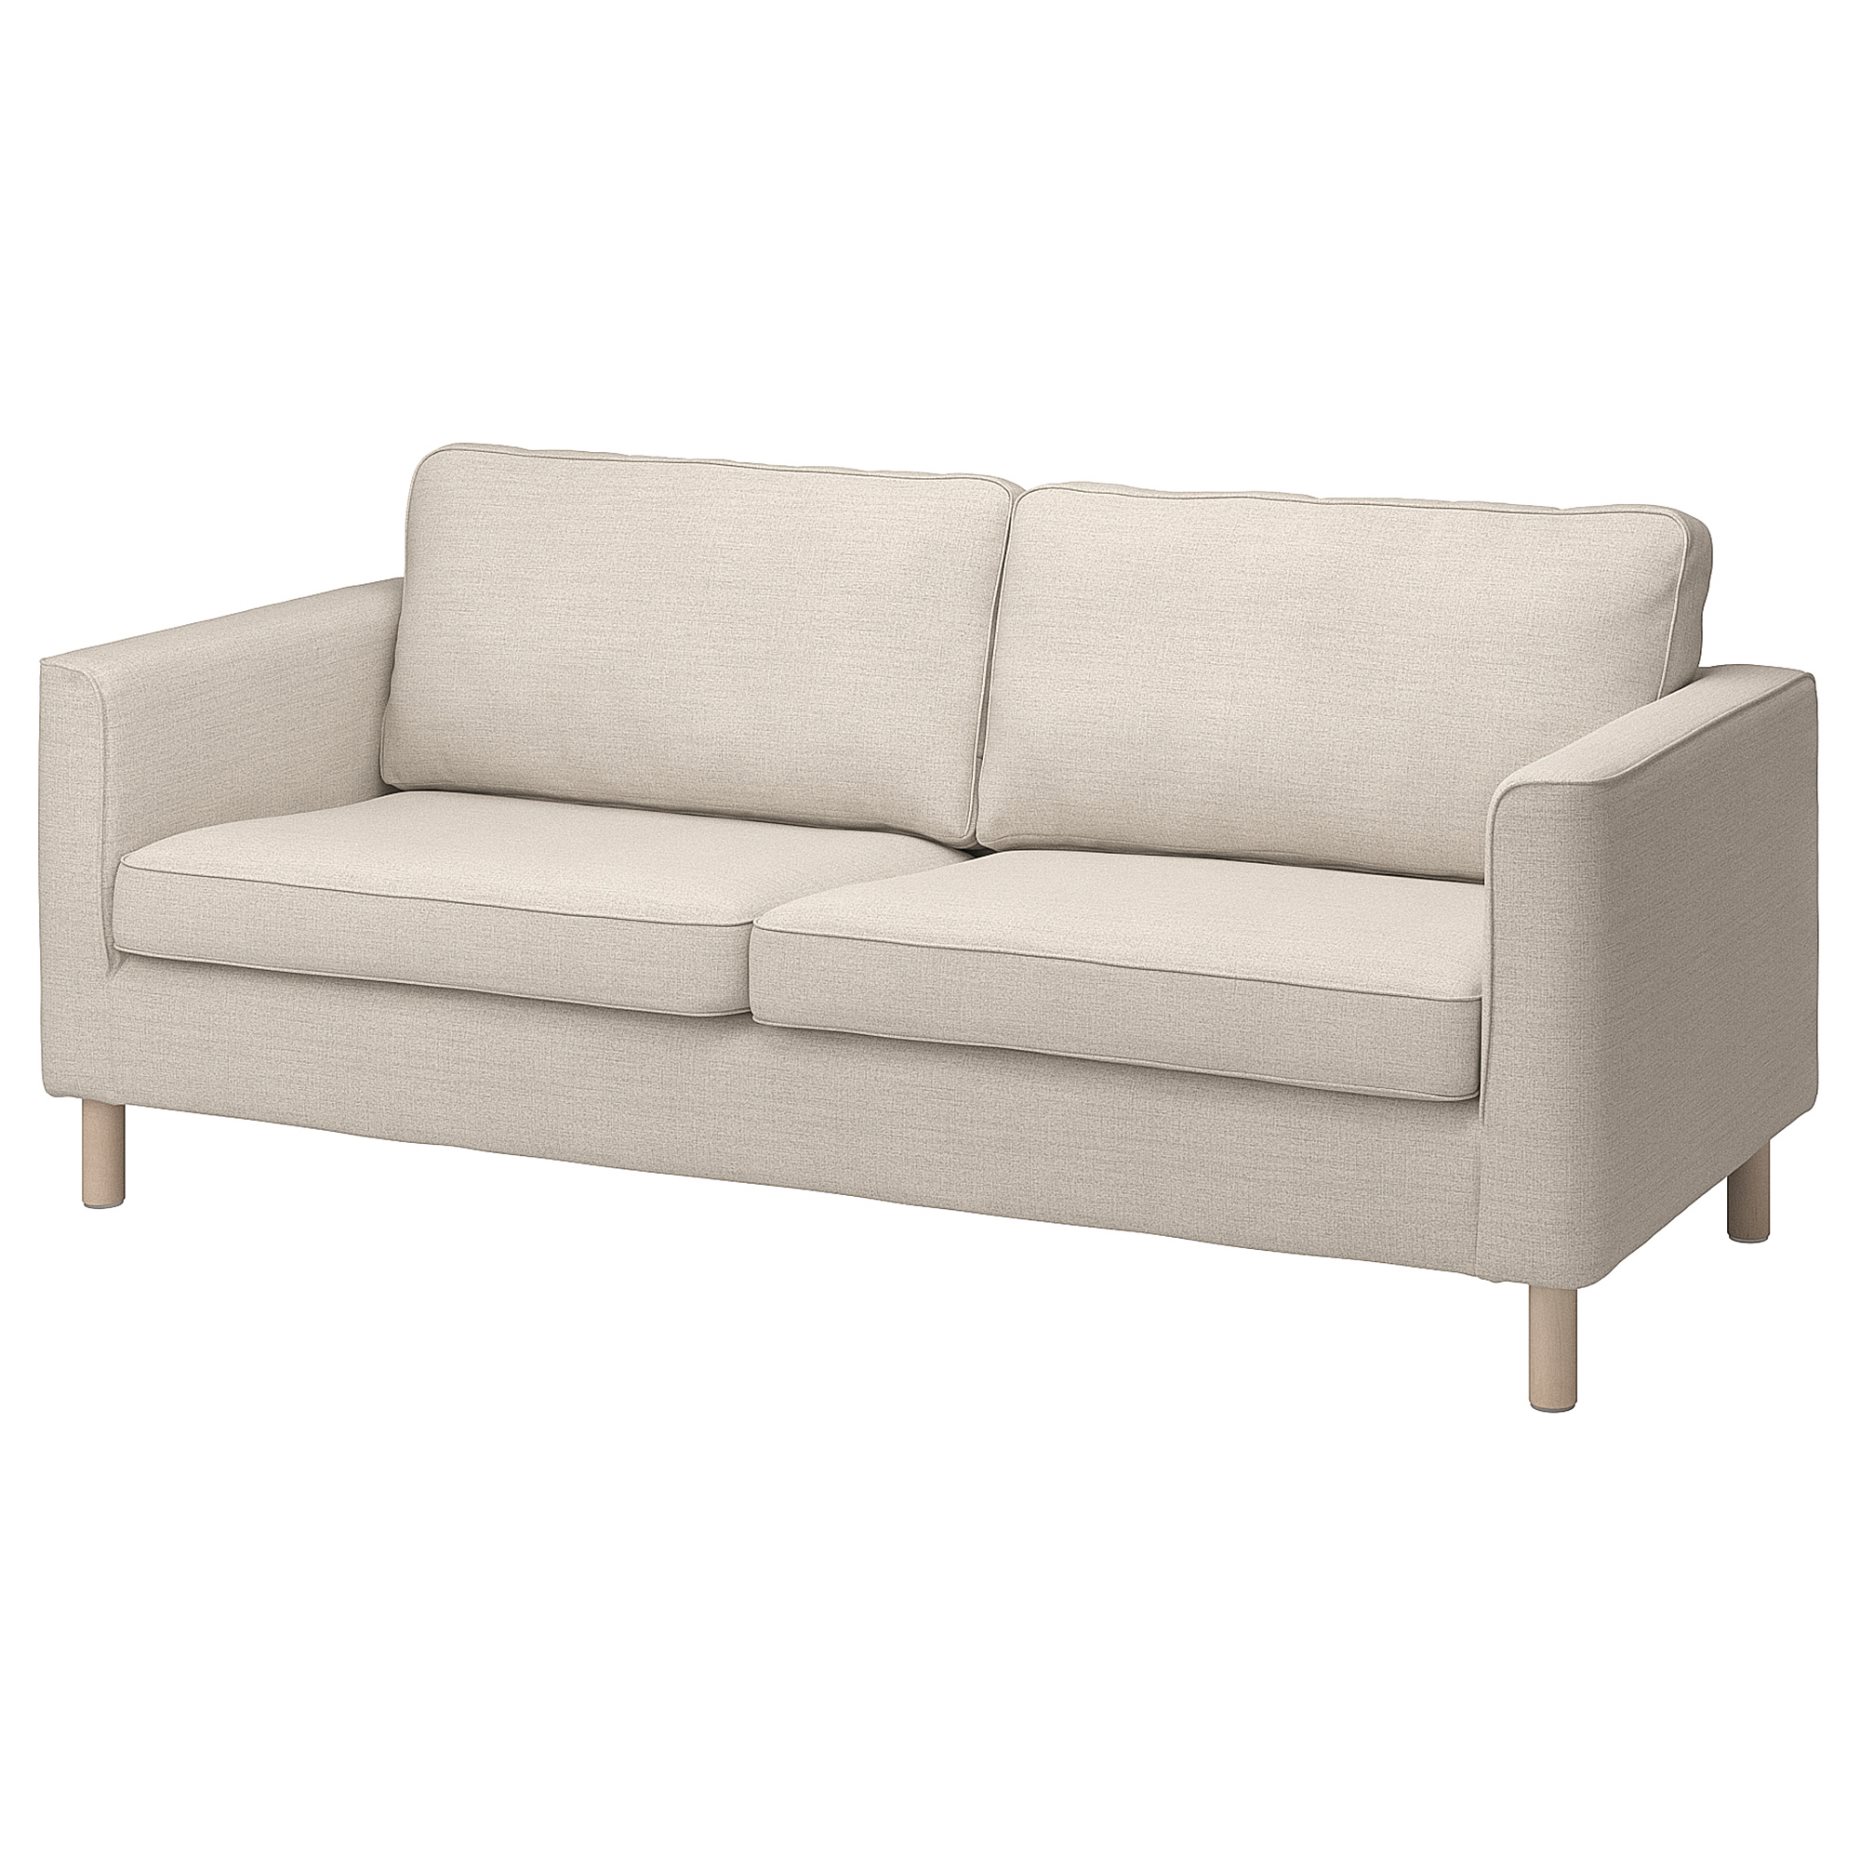 PÄRUP, cover for 3-seat sofa, 304.938.21